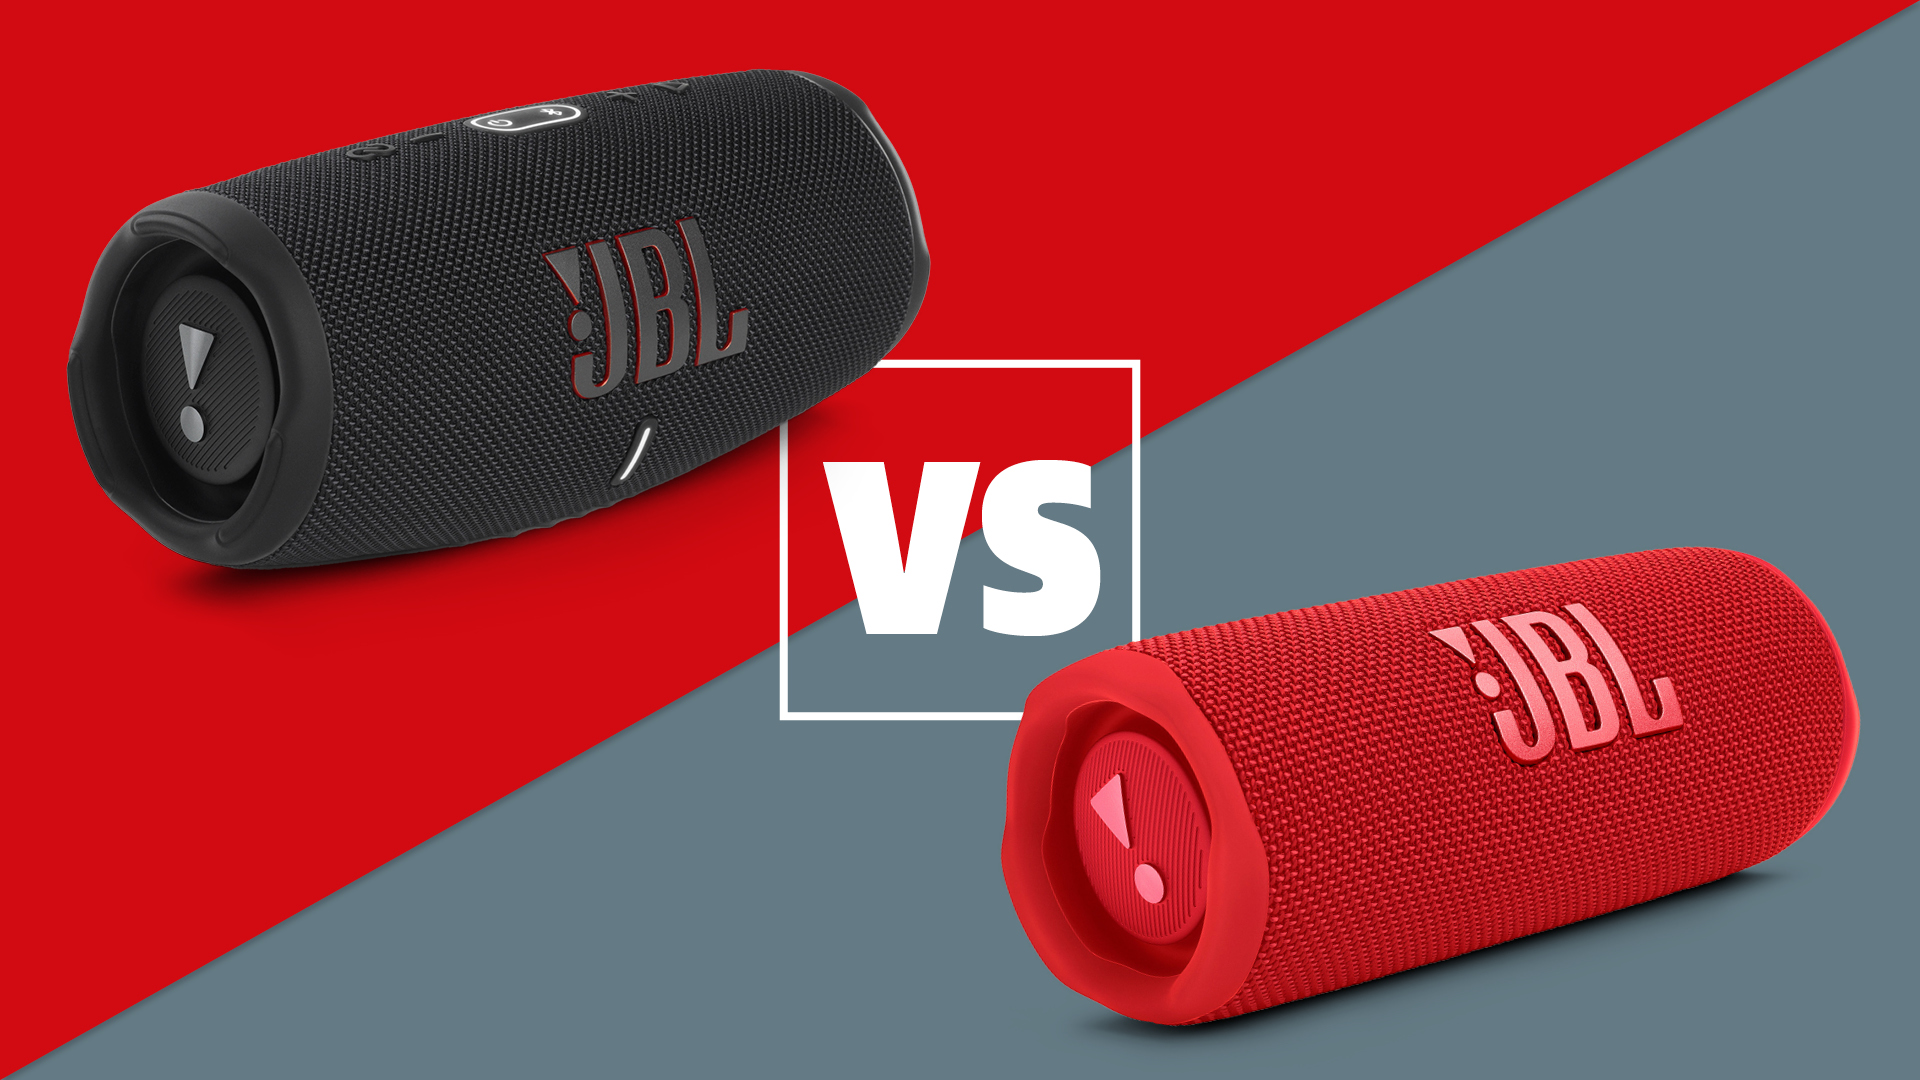 Jbl Charge 5 Vs Flip 6: Which Bluetooth Speaker Is Better? | What Hi-Fi?